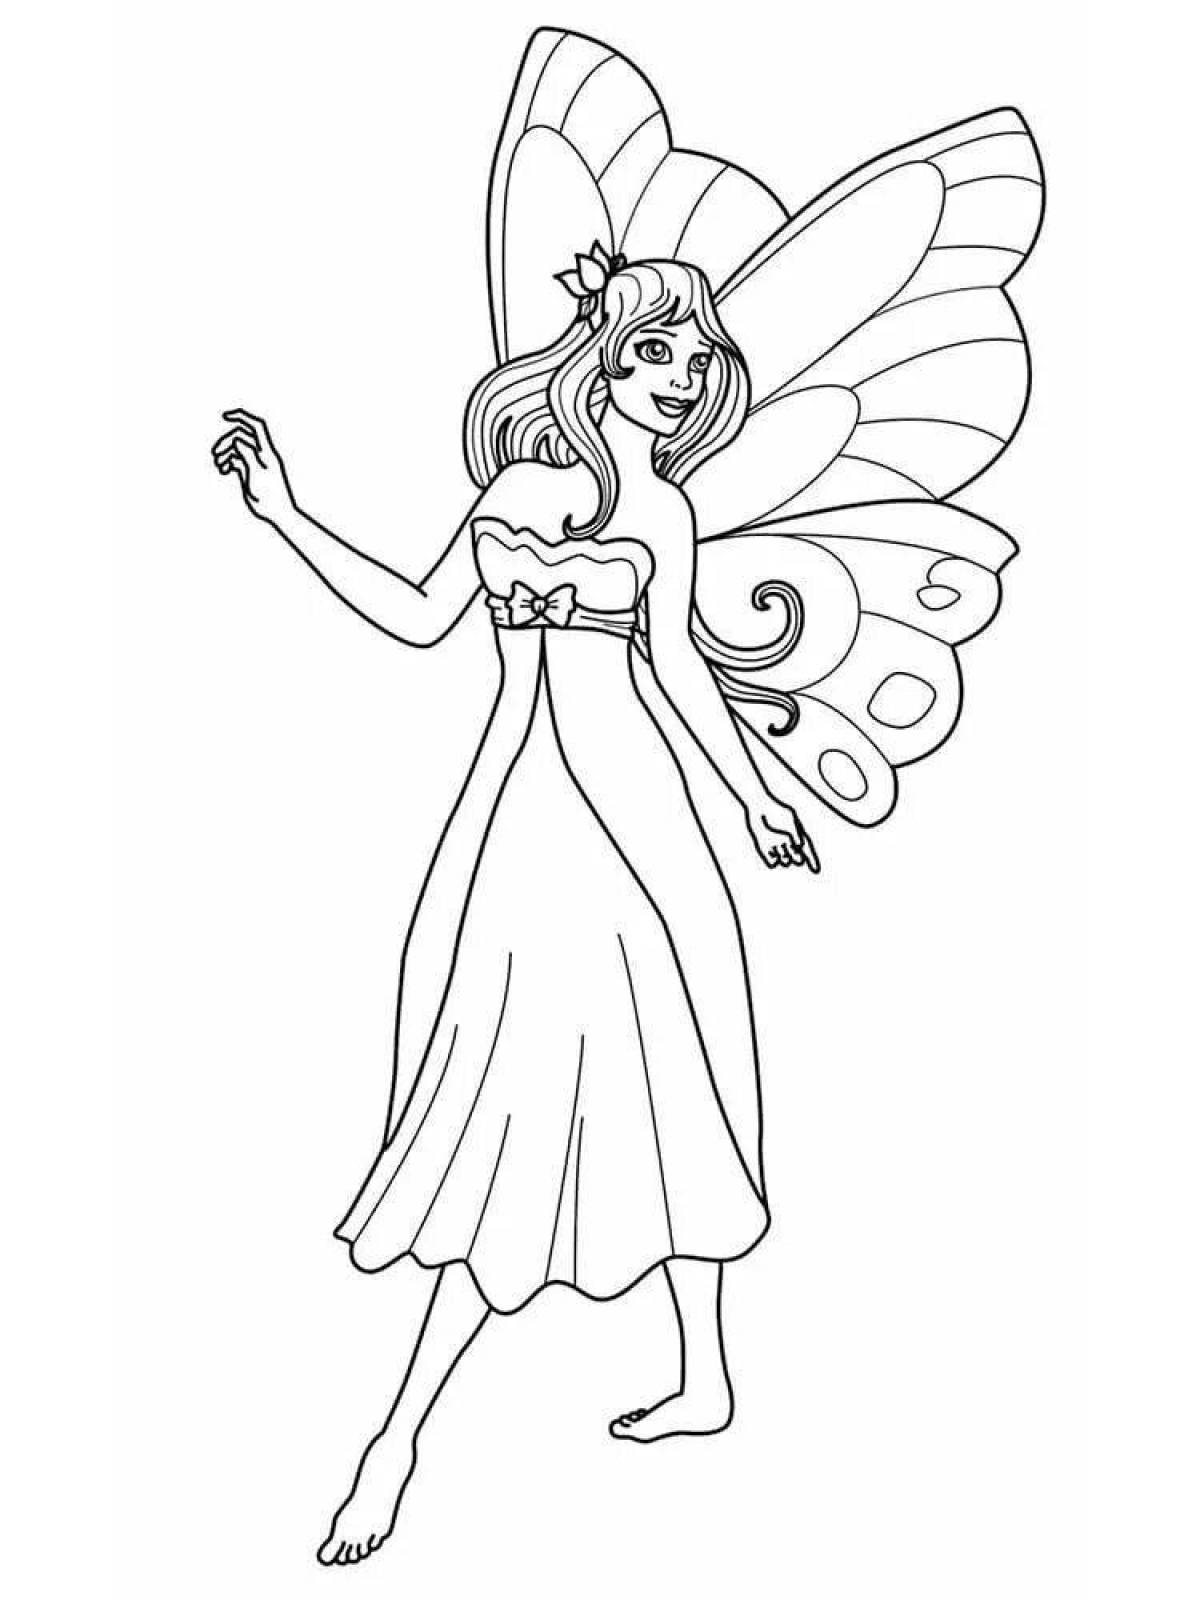 Majestic fairy princess coloring pages